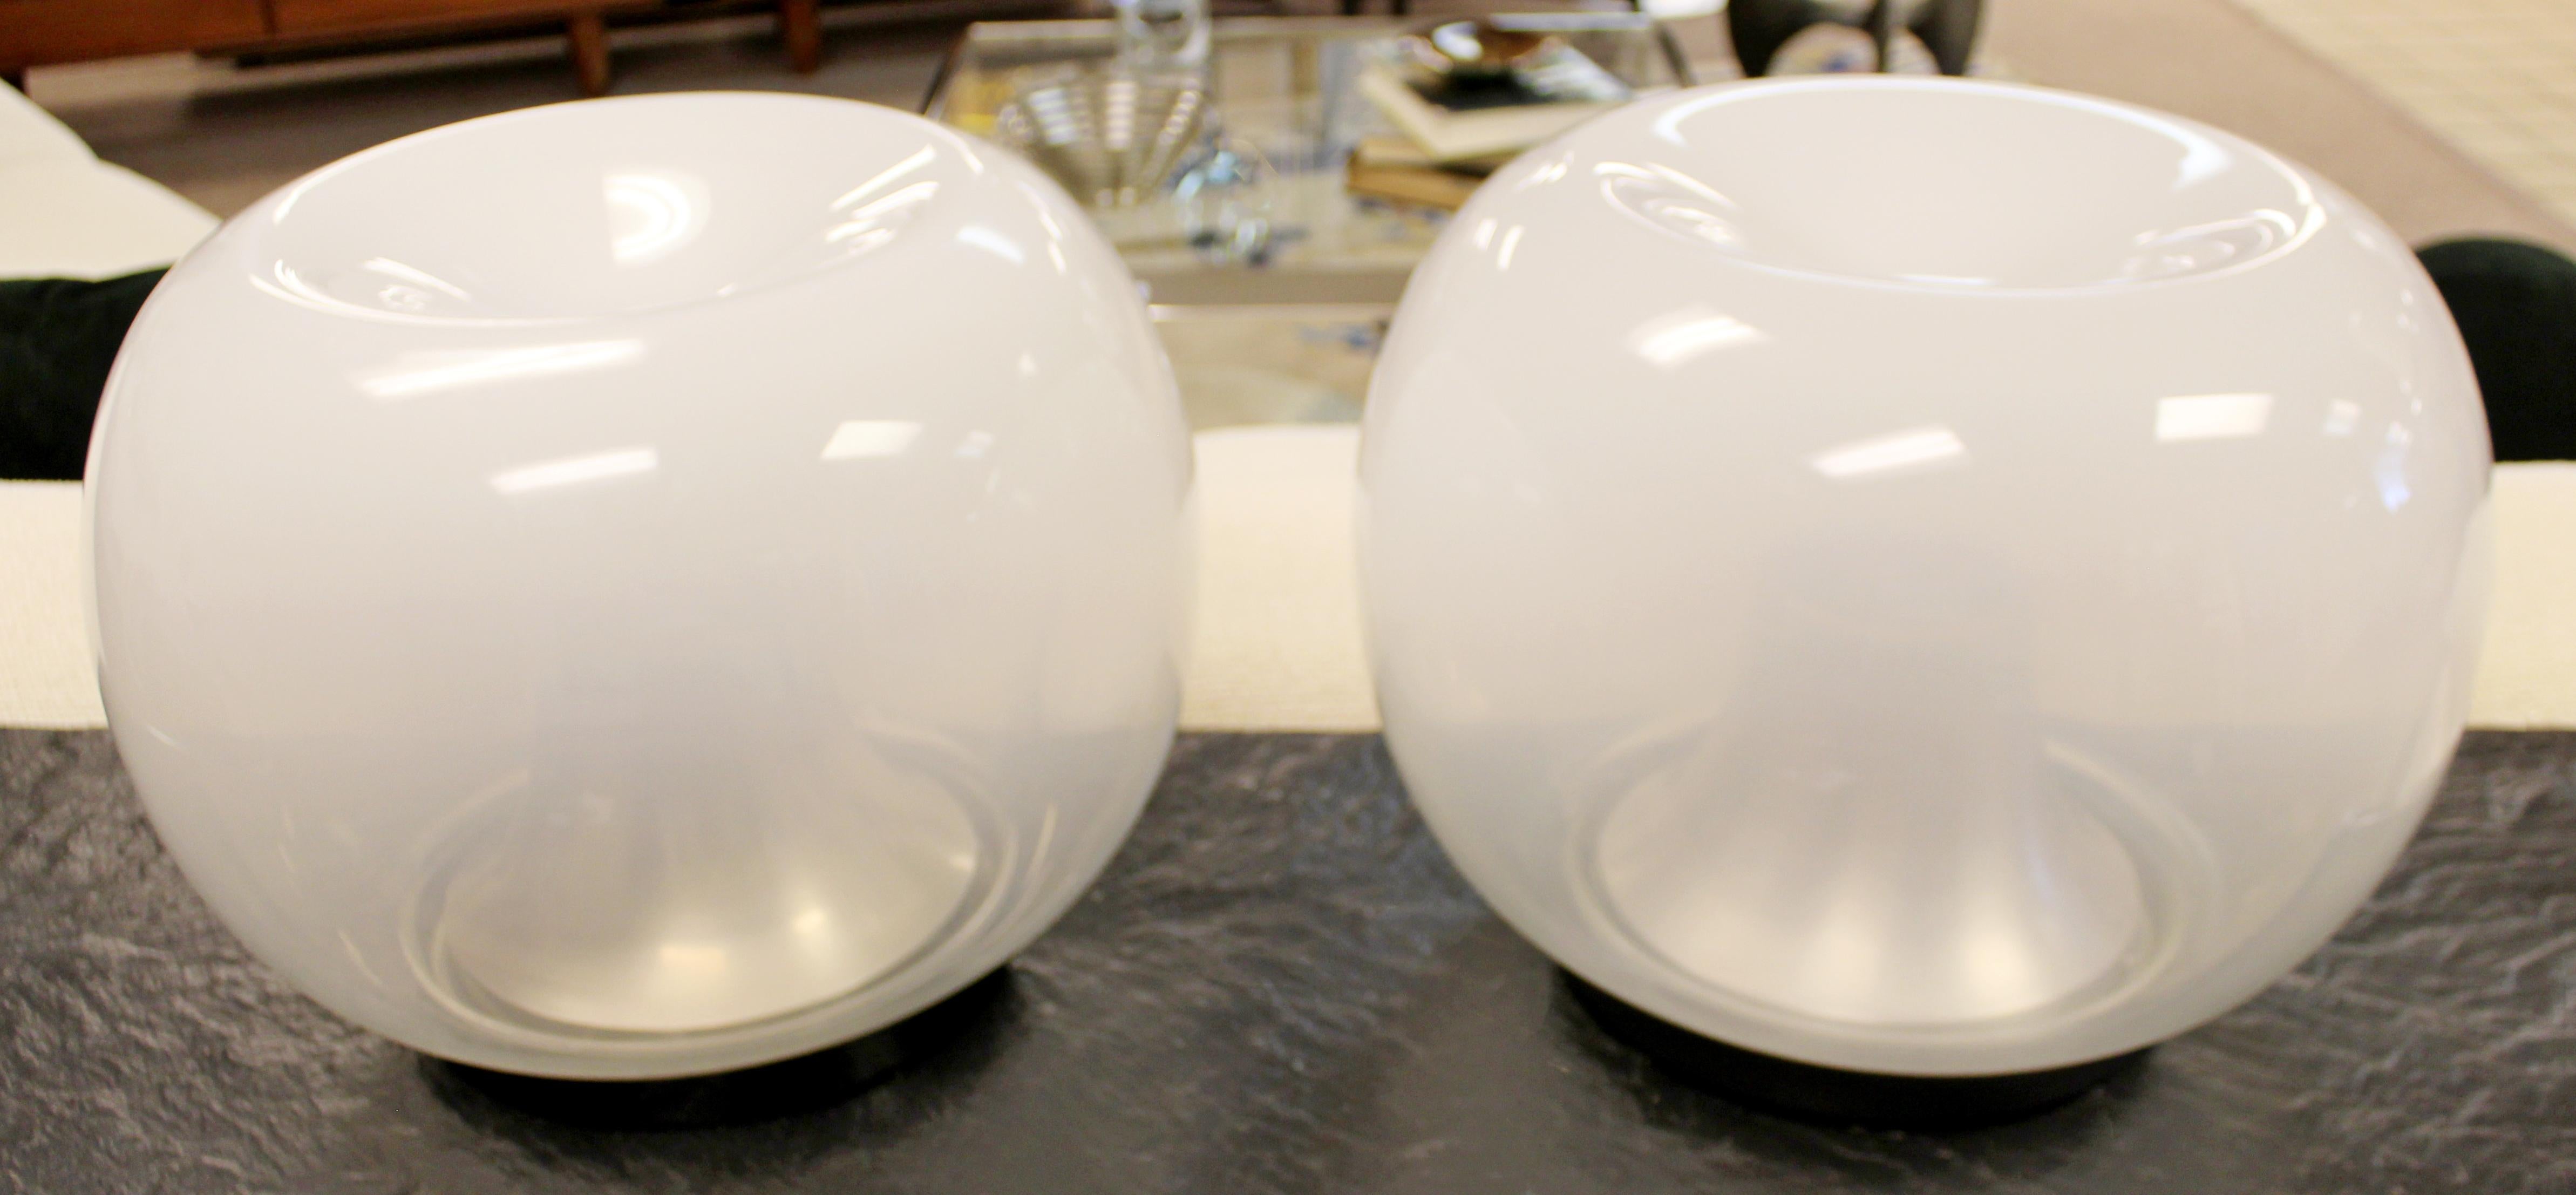 For your consideration is a magnificent pair of glass globe table lamps, by Carlo Nason for Mazzegga, circa the 1970s. In excellent condition. The dimensions of each are 18